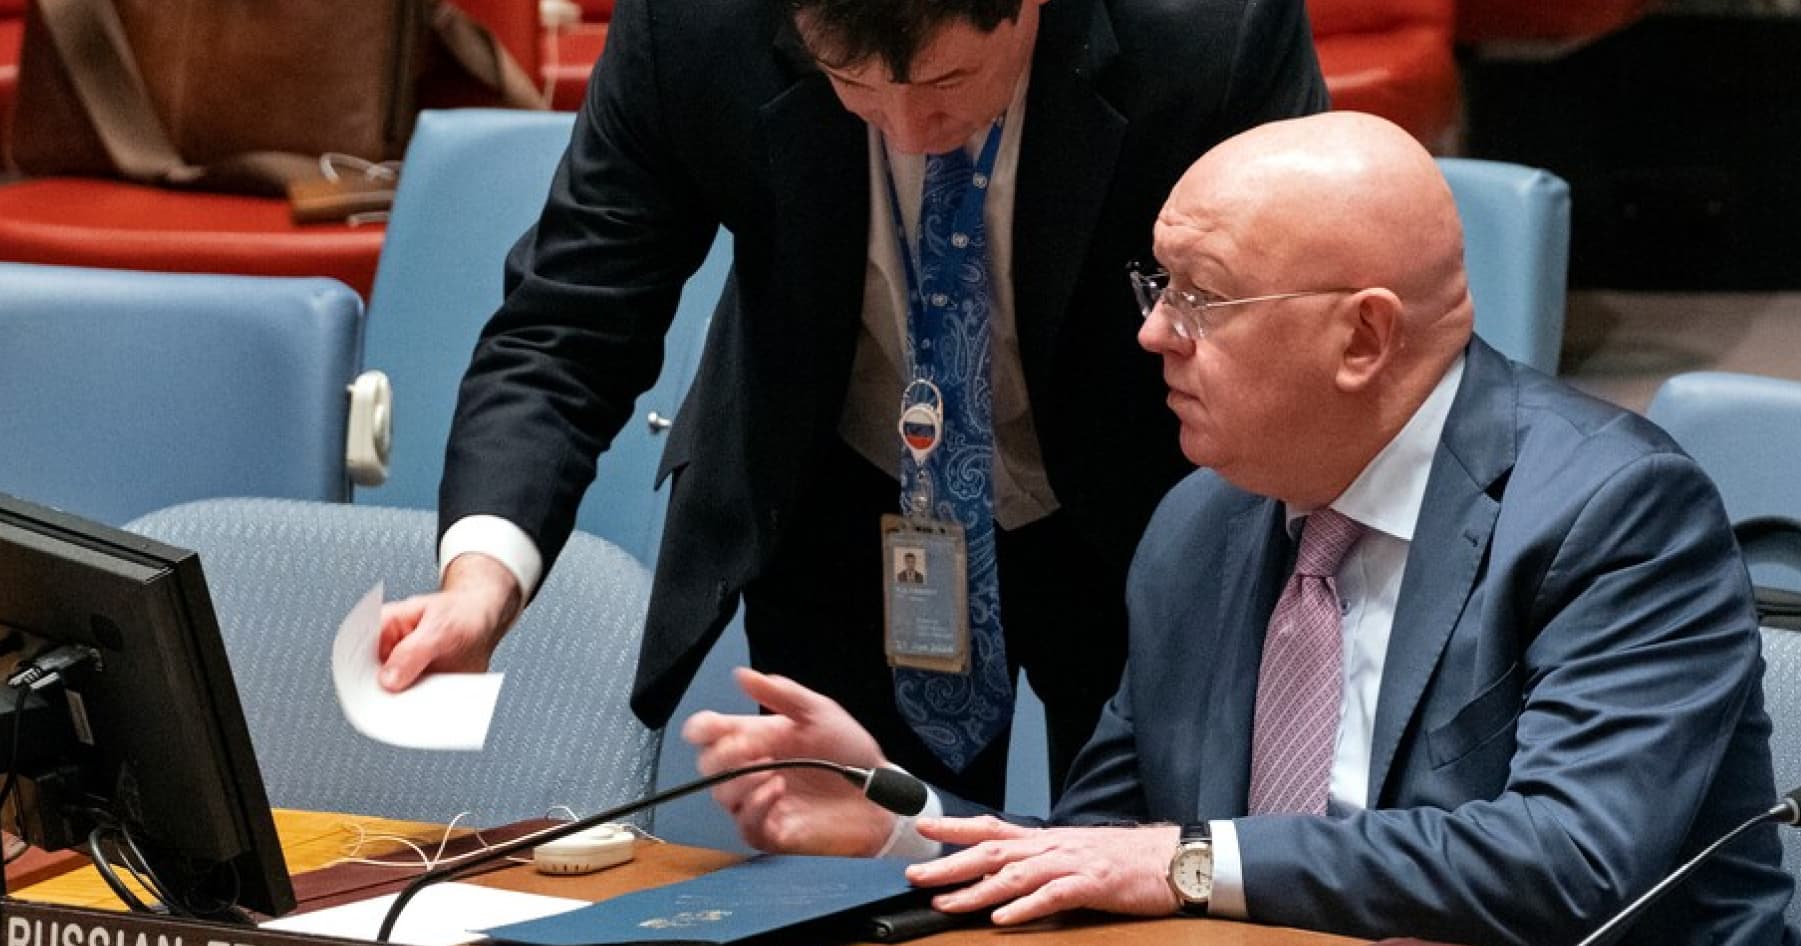 The UN Security Council did not adopt a draft resolution proposed by Russia to establish a commission of inquiry into military biological activities of Ukraine and the United States — the Washington Post